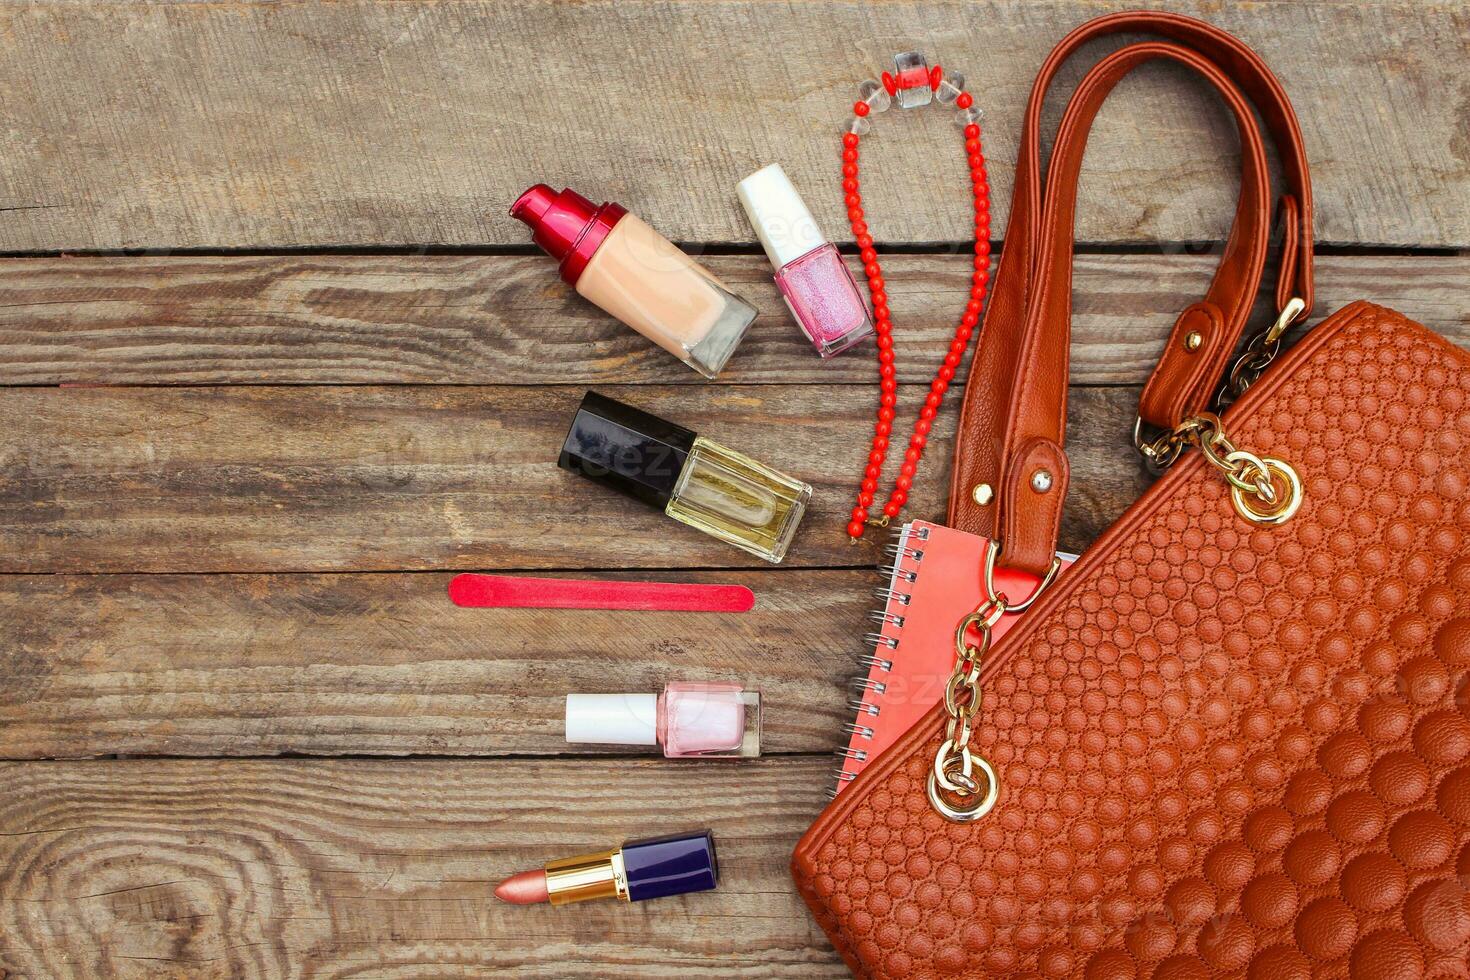 Things from open lady handbag. women's purse on wood background. Toned image. photo